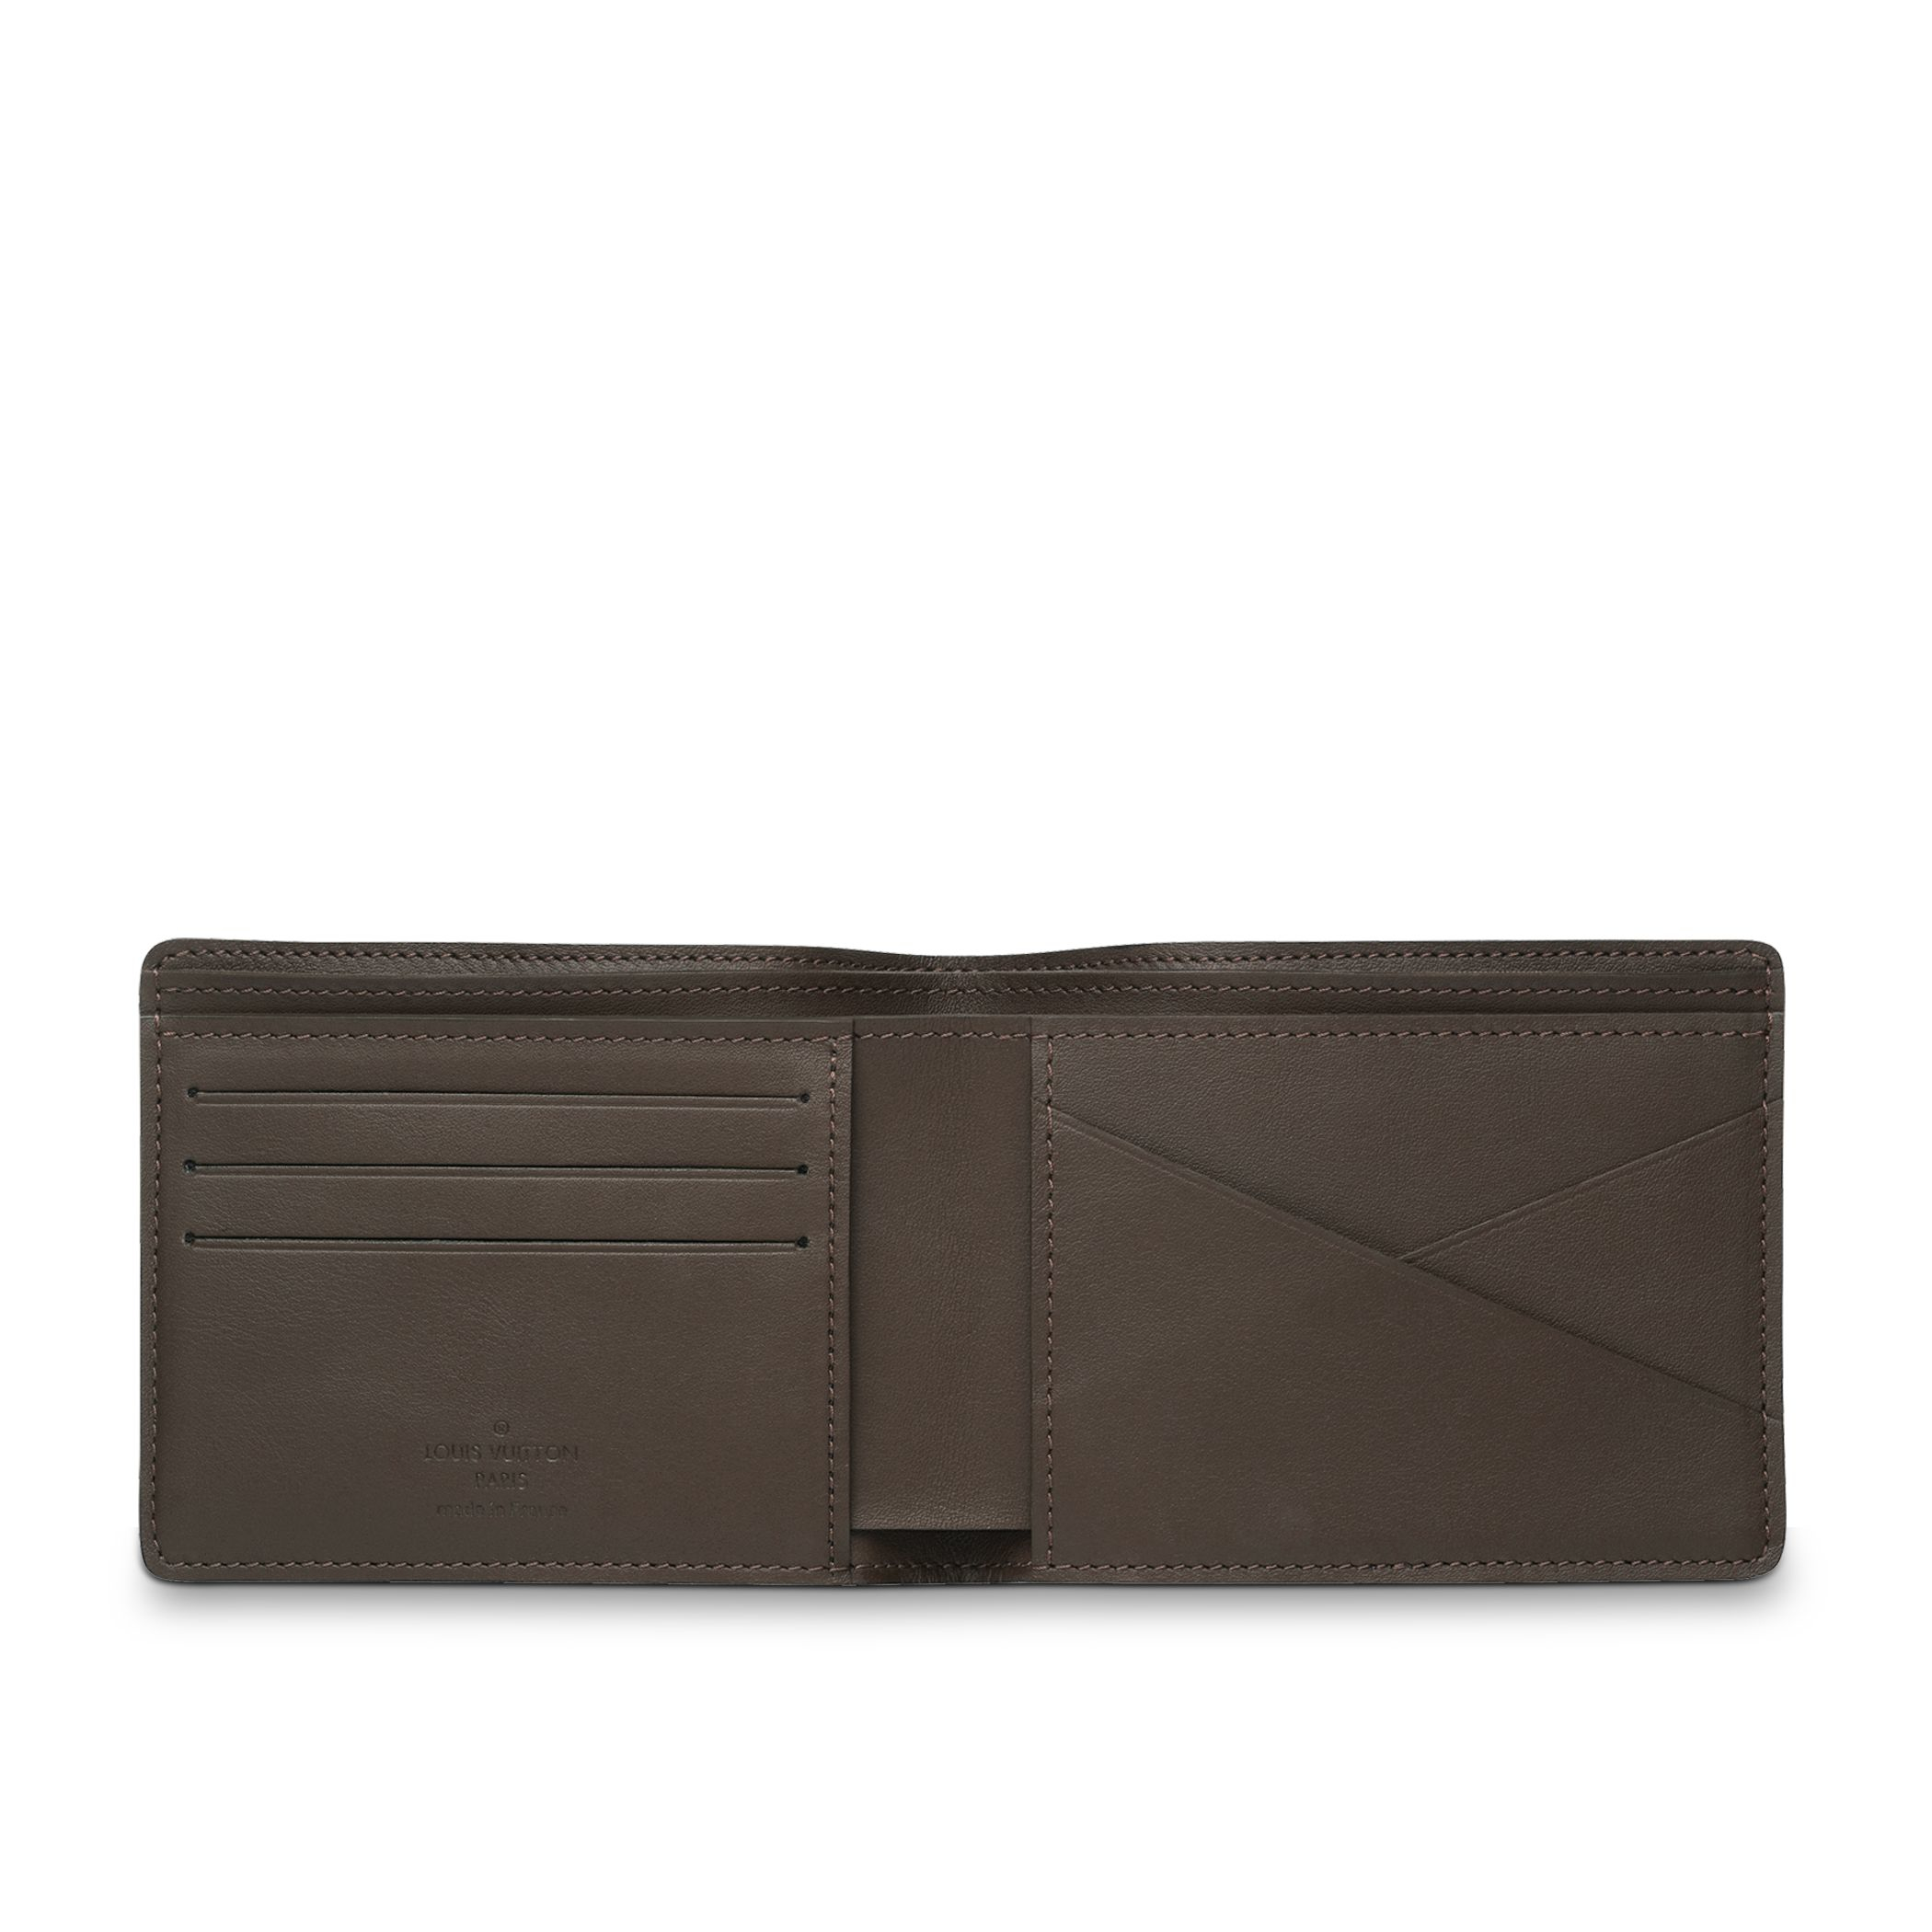 Louis Vuitton Mens Wallet At Macy | Confederated Tribes of the Umatilla Indian Reservation